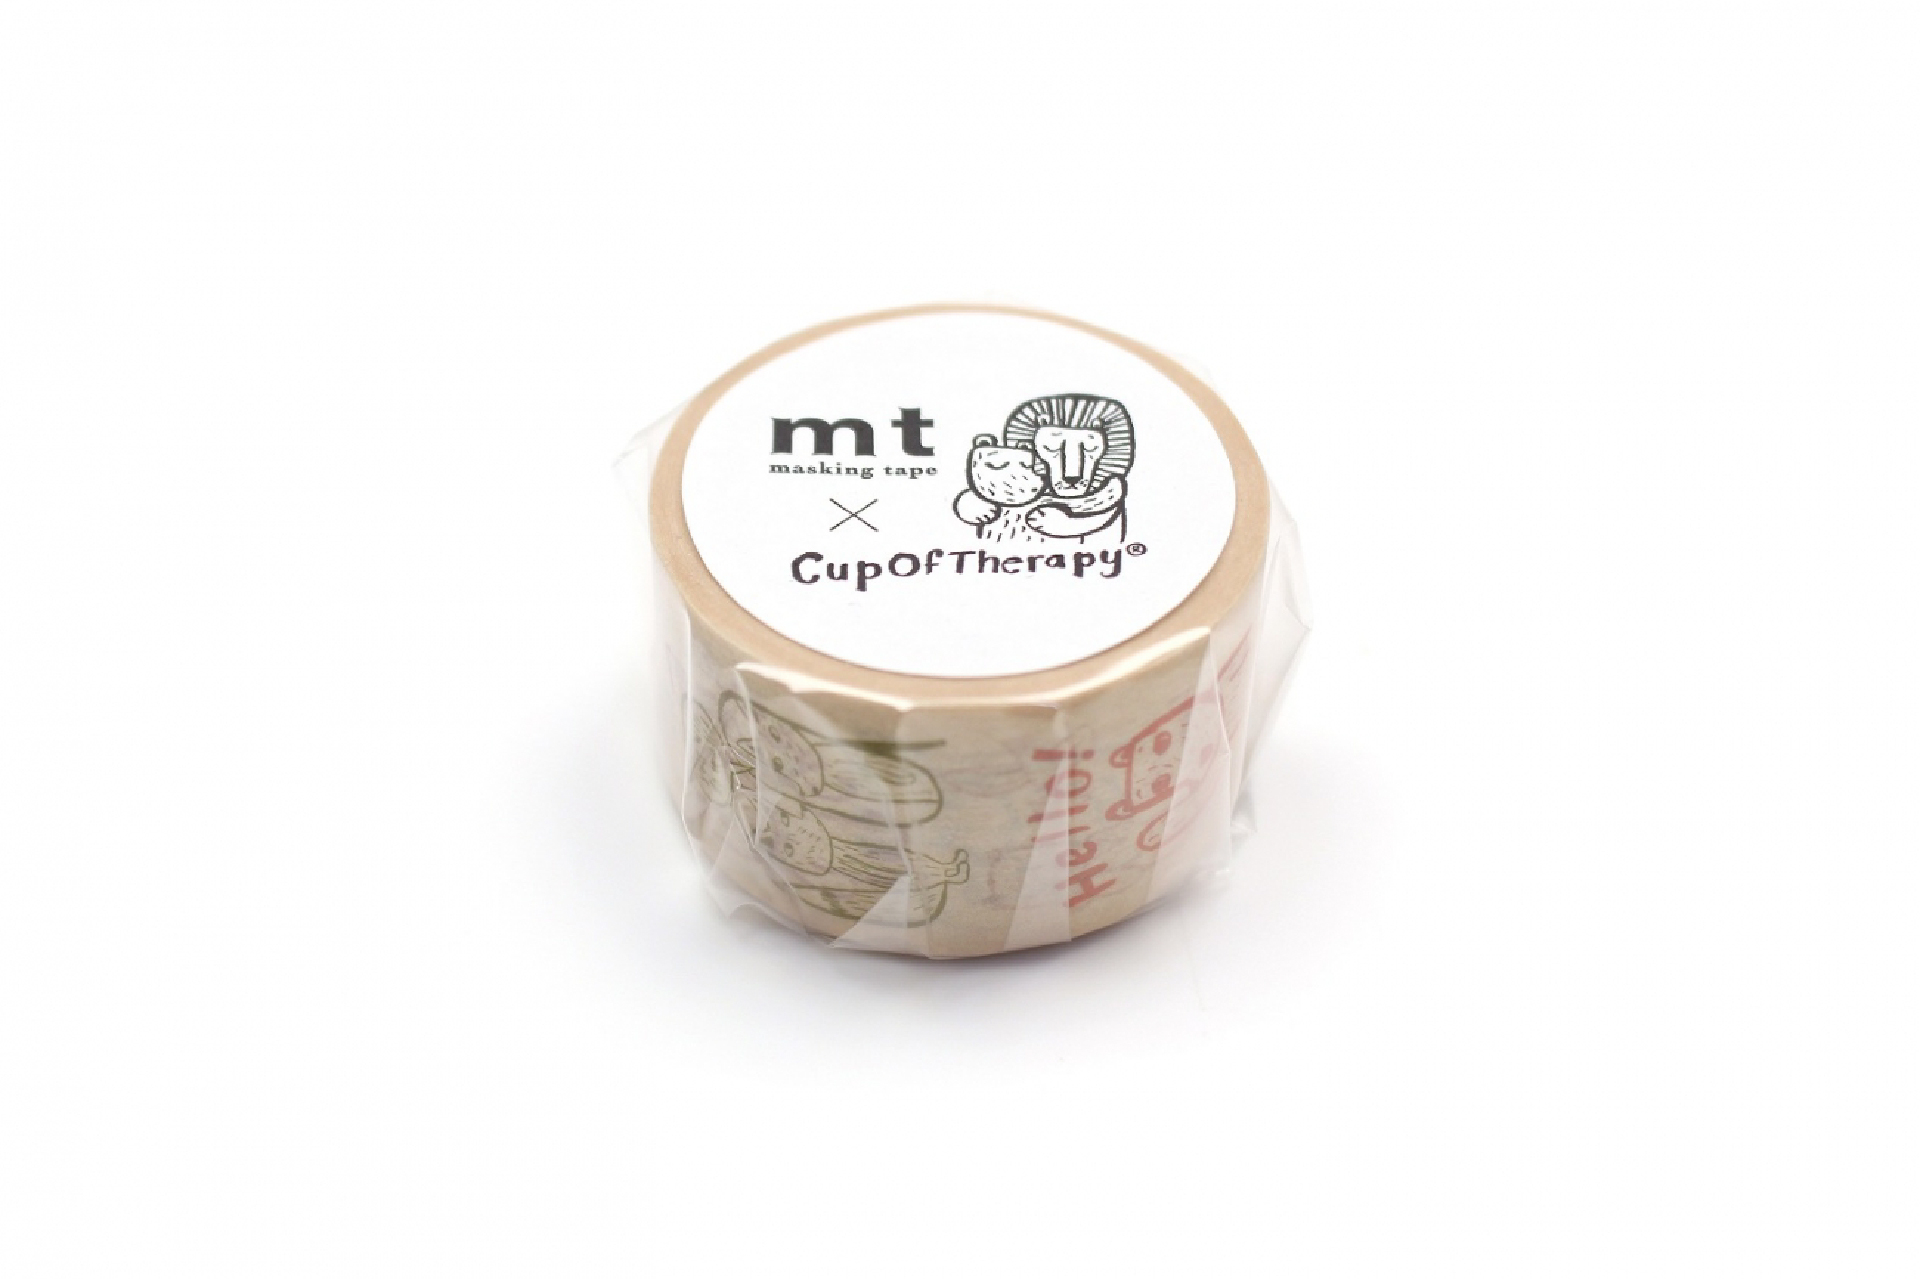 CupOfTherapy メッセージ | mt 北欧シリーズ CupOfTherapy カップオブ ...